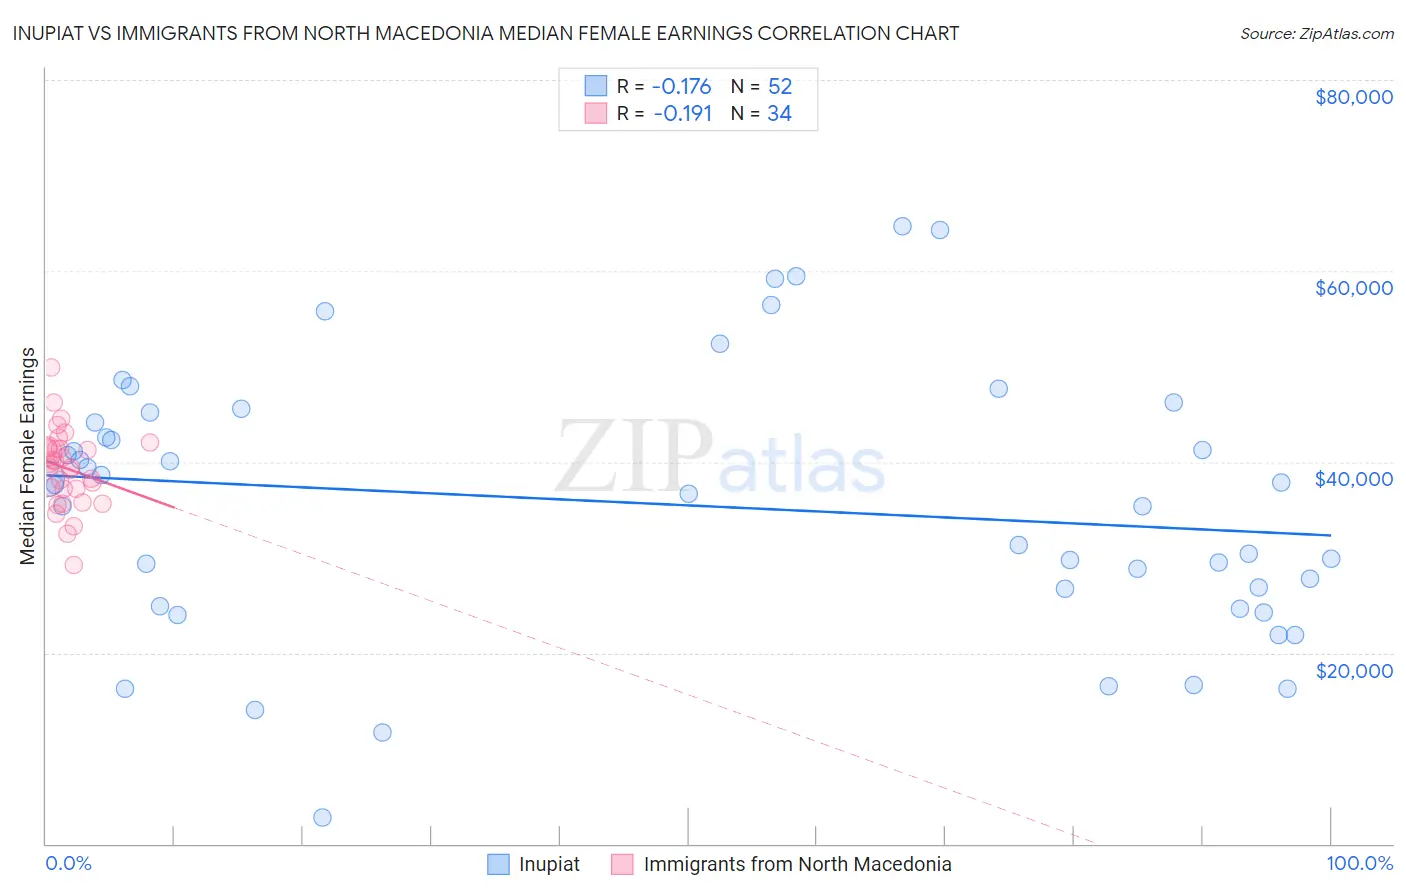 Inupiat vs Immigrants from North Macedonia Median Female Earnings